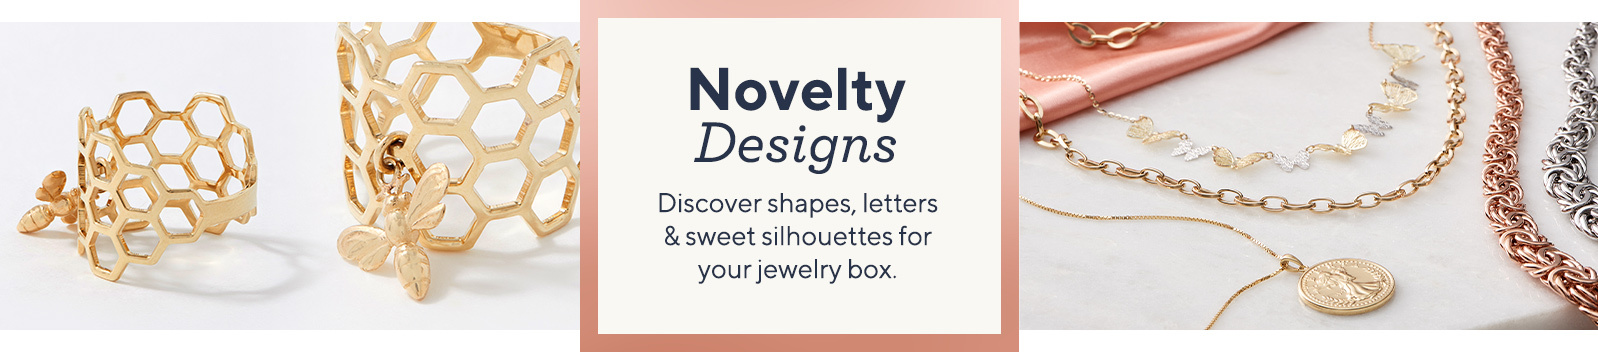 Novelty Designs  Discover shapes, letters & sweet designs for your jewelry box.